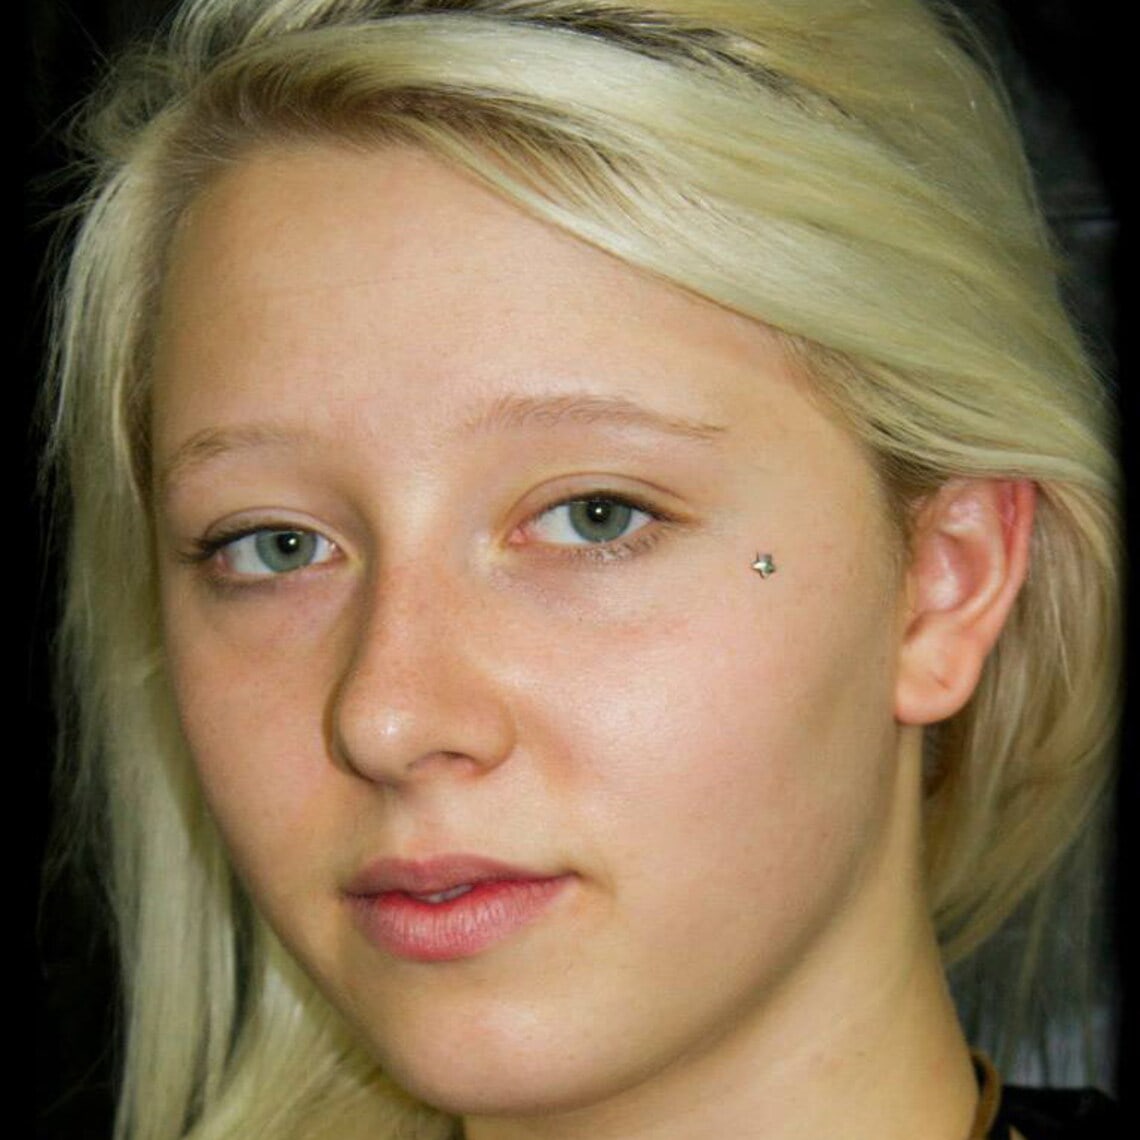 star shaped tops on the woman's dermal piercing